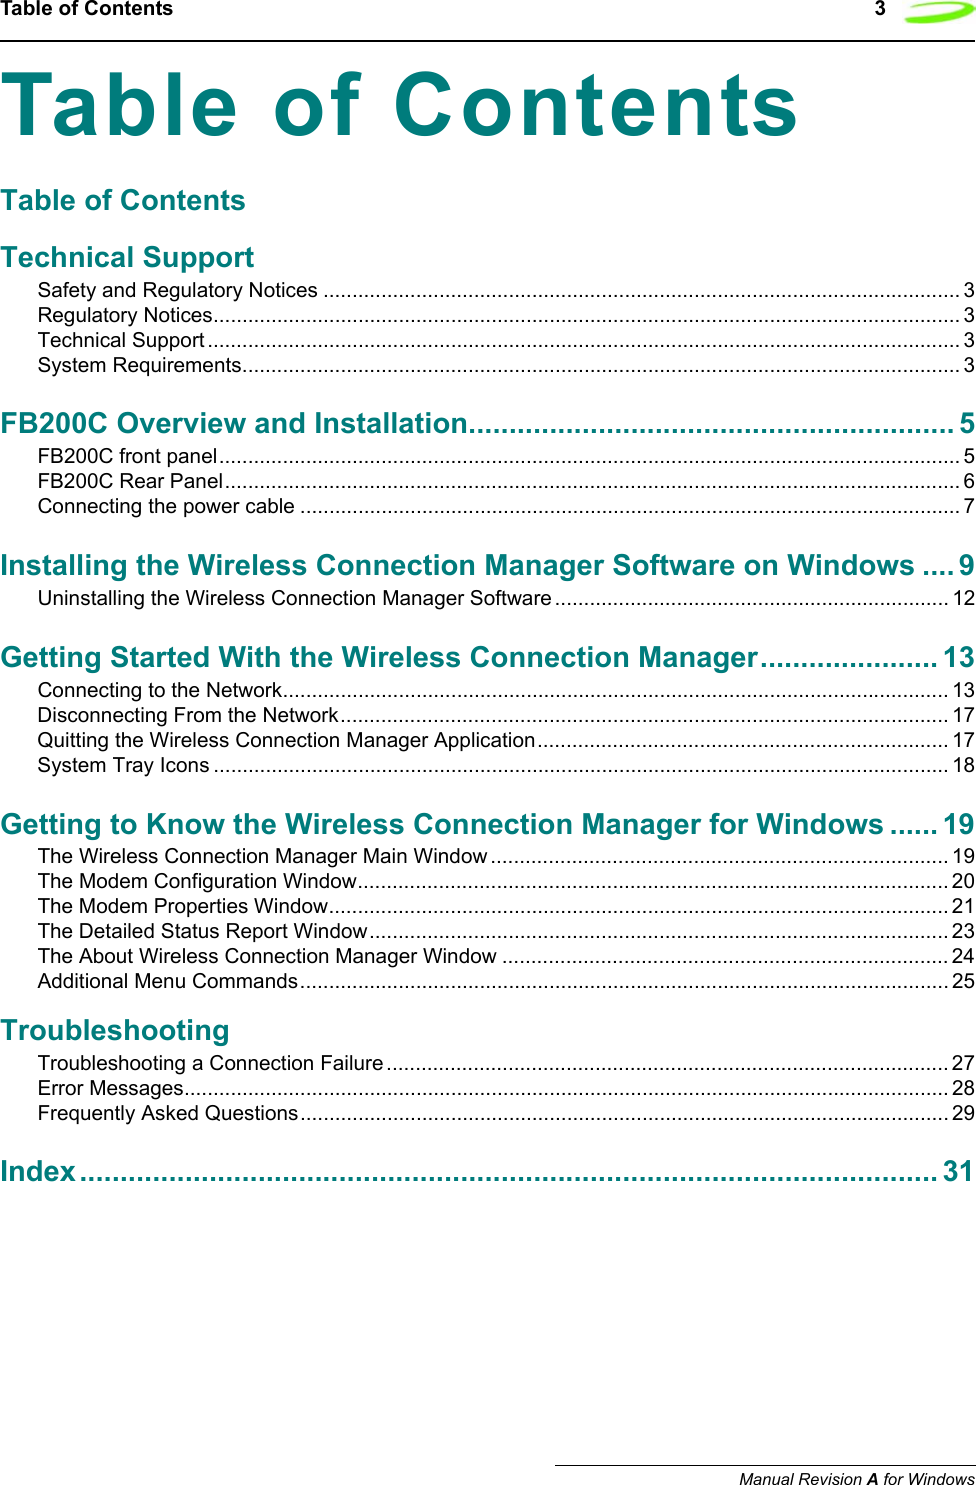 Table of Contents 3Manual Revision A for WindowsTable of ContentsTable of ContentsTechnical SupportSafety and Regulatory Notices .............................................................................................................. 3Regulatory Notices................................................................................................................................. 3Technical Support .................................................................................................................................. 3System Requirements............................................................................................................................ 3FB200C Overview and Installation............................................................ 5FB200C front panel................................................................................................................................ 5FB200C Rear Panel............................................................................................................................... 6Connecting the power cable .................................................................................................................. 7Installing the Wireless Connection Manager Software on Windows .... 9Uninstalling the Wireless Connection Manager Software .................................................................... 12Getting Started With the Wireless Connection Manager...................... 13Connecting to the Network................................................................................................................... 13Disconnecting From the Network......................................................................................................... 17Quitting the Wireless Connection Manager Application....................................................................... 17System Tray Icons ............................................................................................................................... 18Getting to Know the Wireless Connection Manager for Windows ...... 19The Wireless Connection Manager Main Window ............................................................................... 19The Modem Configuration Window...................................................................................................... 20The Modem Properties Window........................................................................................................... 21The Detailed Status Report Window.................................................................................................... 23The About Wireless Connection Manager Window ............................................................................. 24Additional Menu Commands................................................................................................................ 25TroubleshootingTroubleshooting a Connection Failure ................................................................................................. 27Error Messages.................................................................................................................................... 28Frequently Asked Questions................................................................................................................ 29Index.......................................................................................................... 31